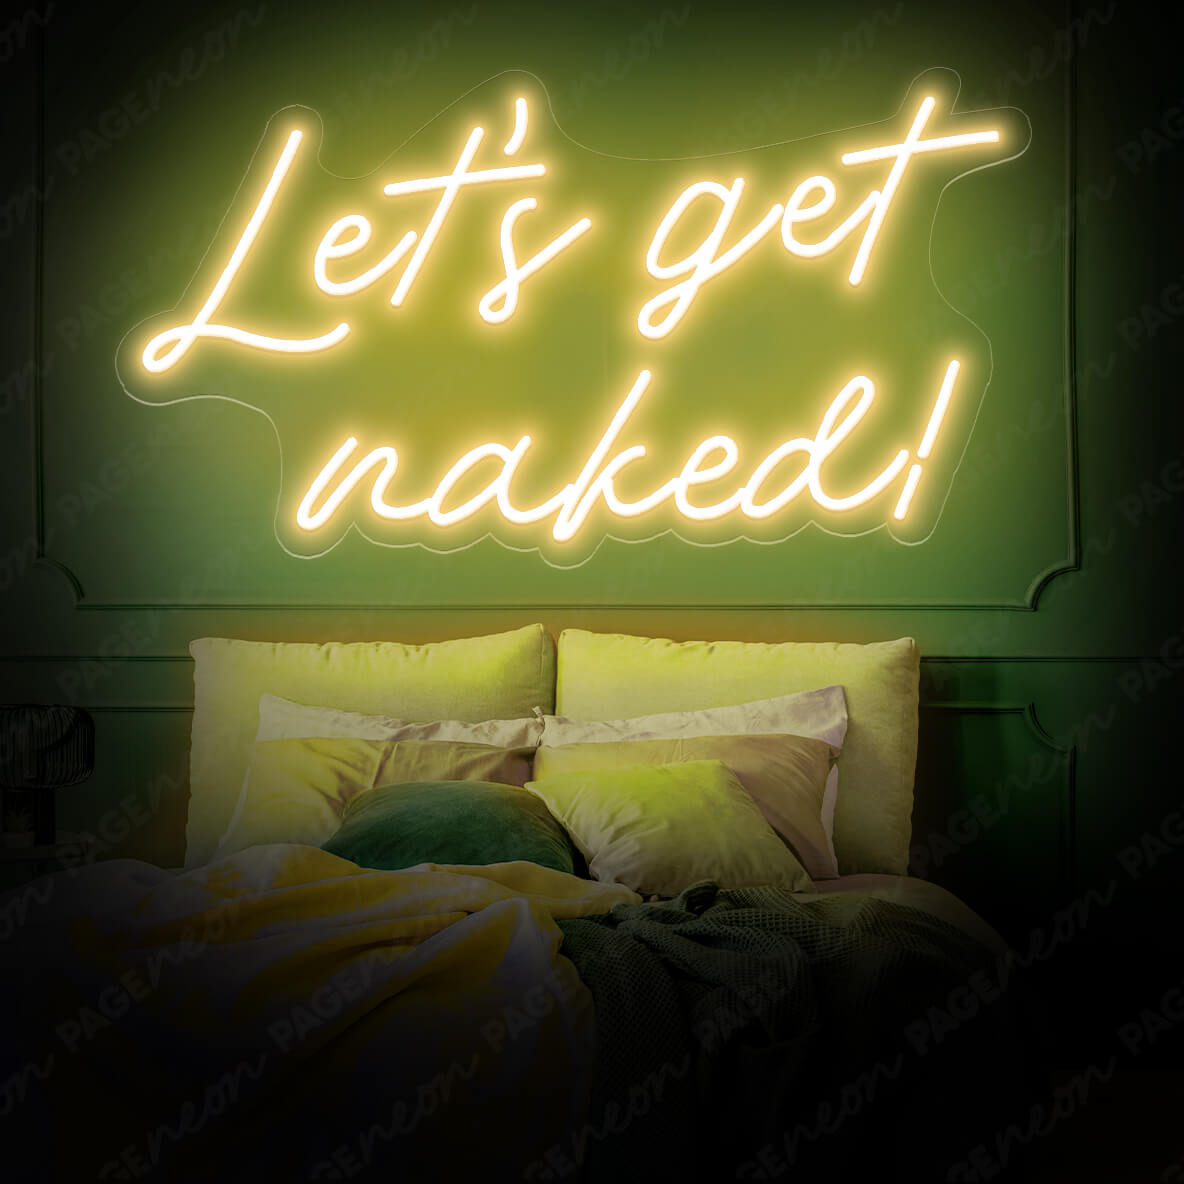 Let's Get Naked Neon Sign Man Cave Led Light Gold Yellow